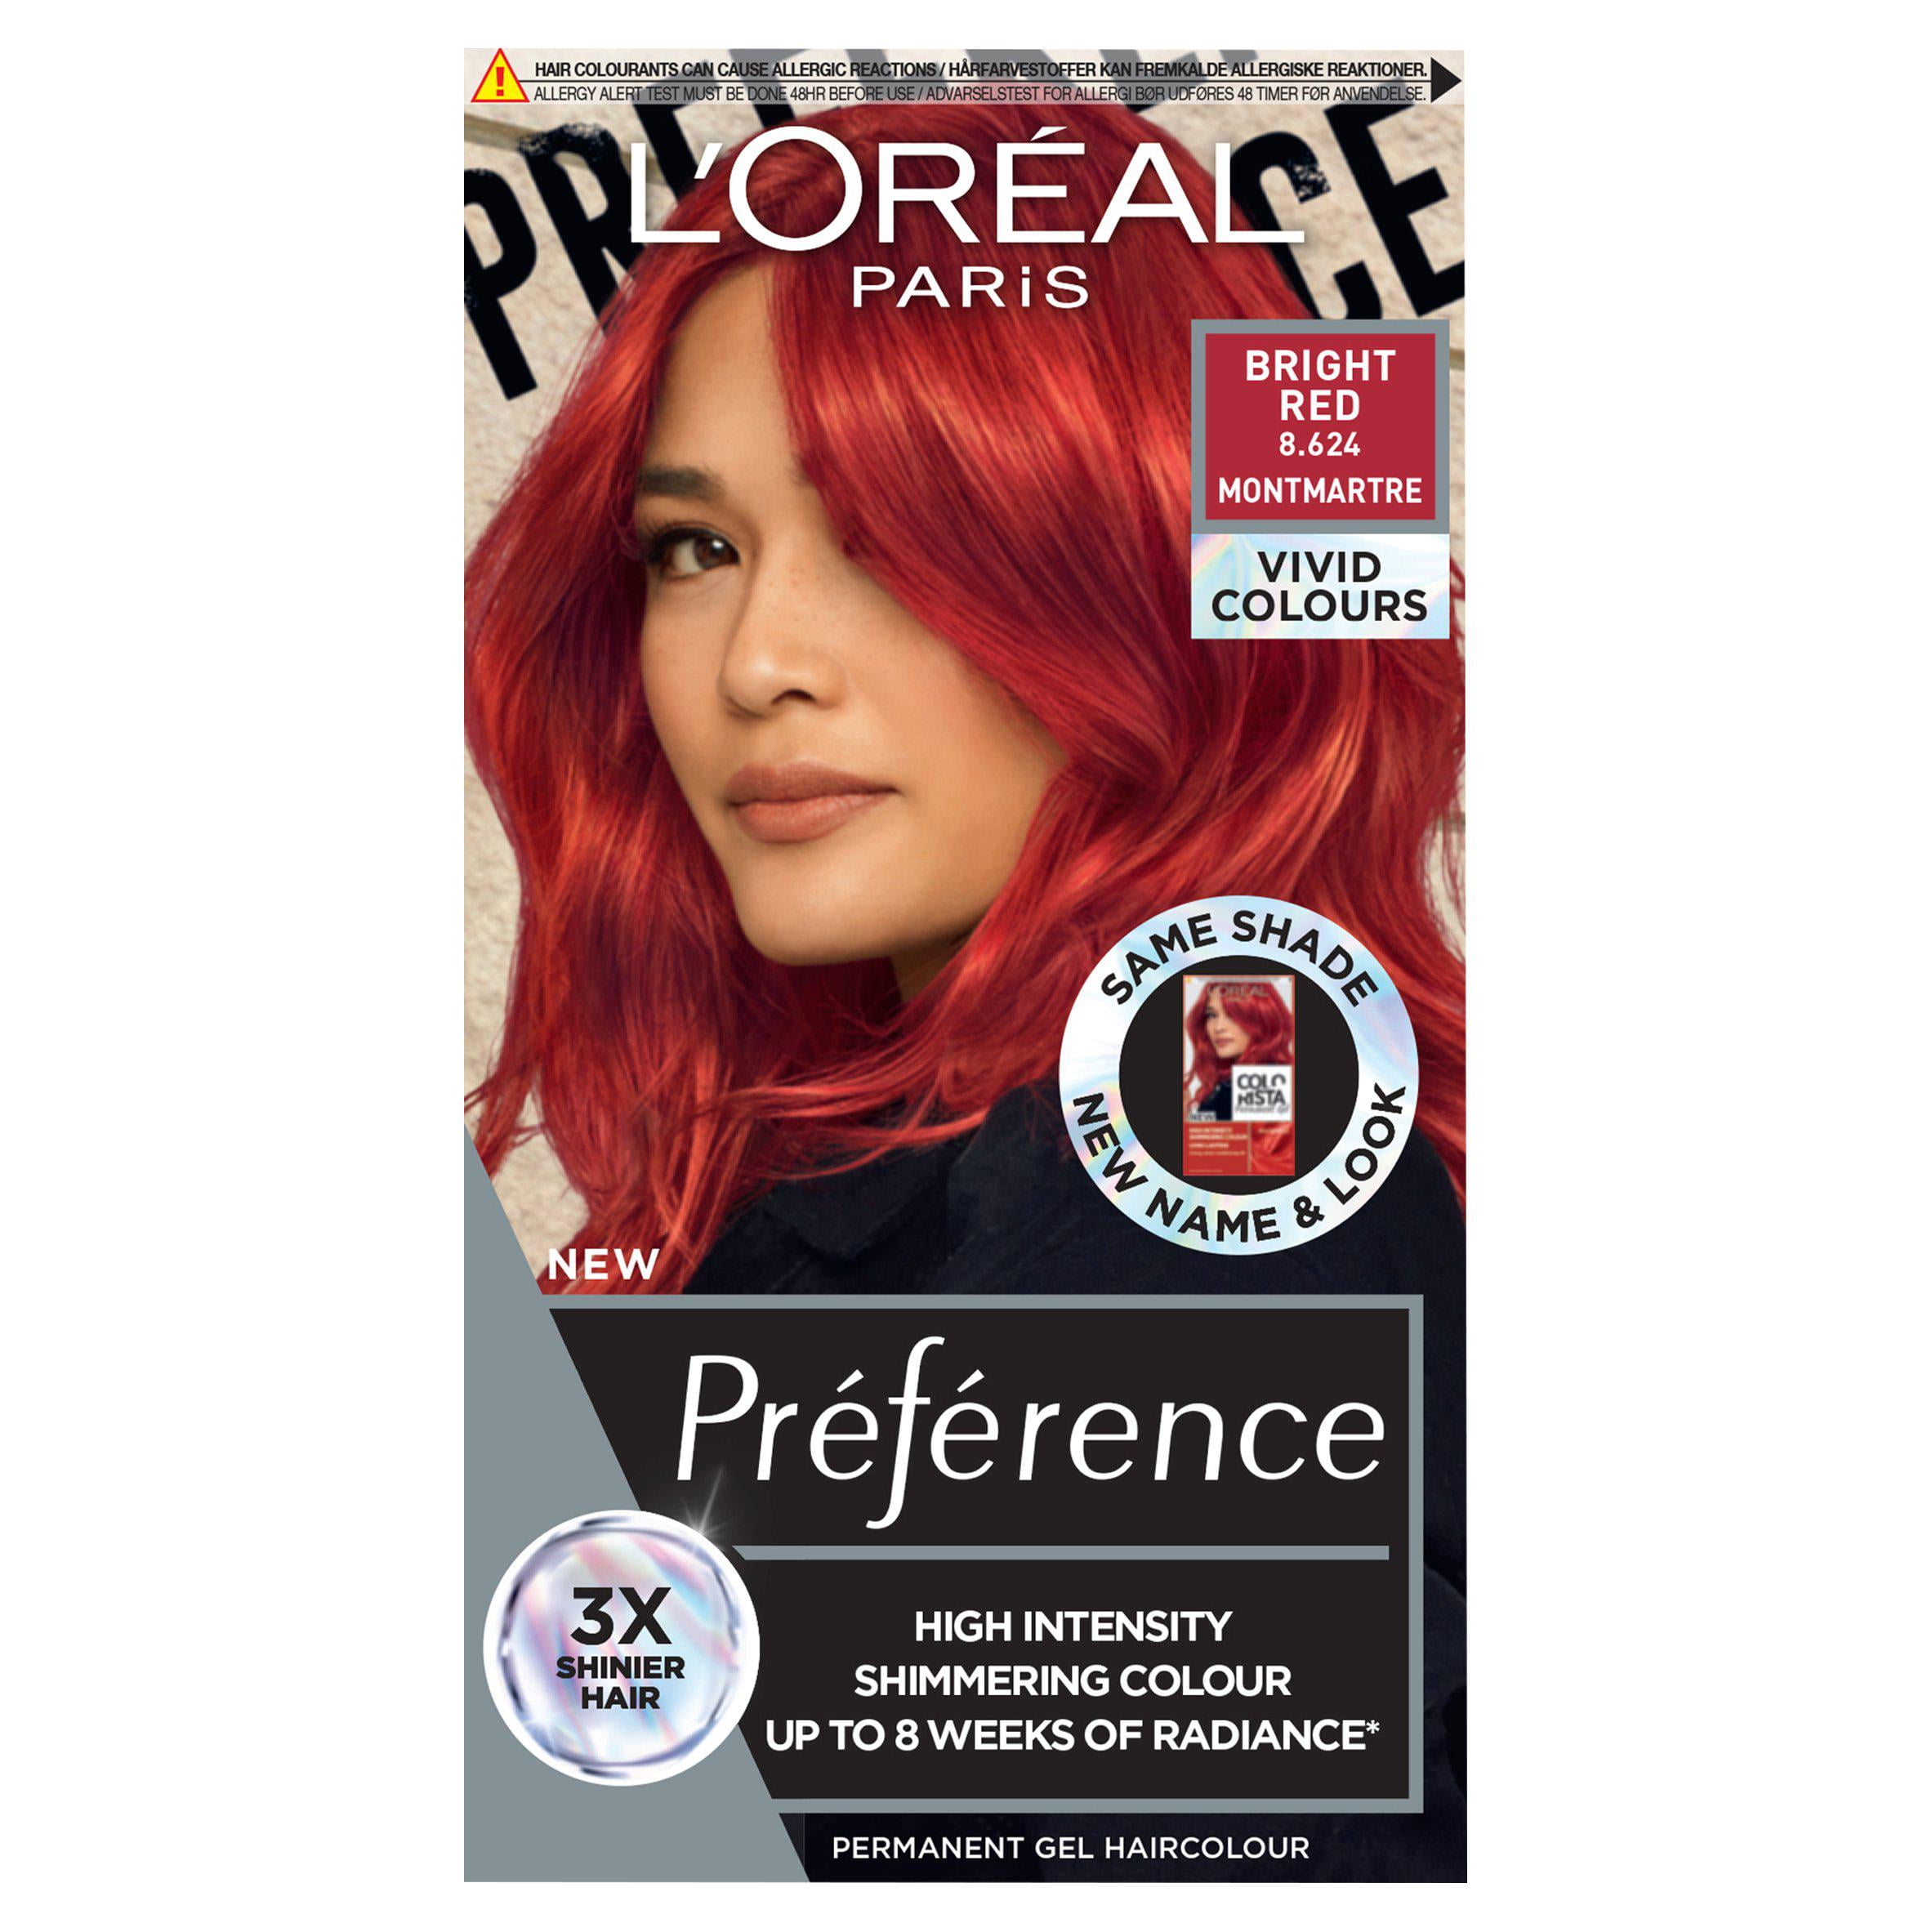 Selskabelig tidligste rapport L'Oreal Paris Preference (Colorista) Bright Red Permanent Gel Hair Dye -  European Version NOT North American Variety - Imported from United Kingdom  by Sentogo - SOLD AS A 2 PACK - Walmart.com